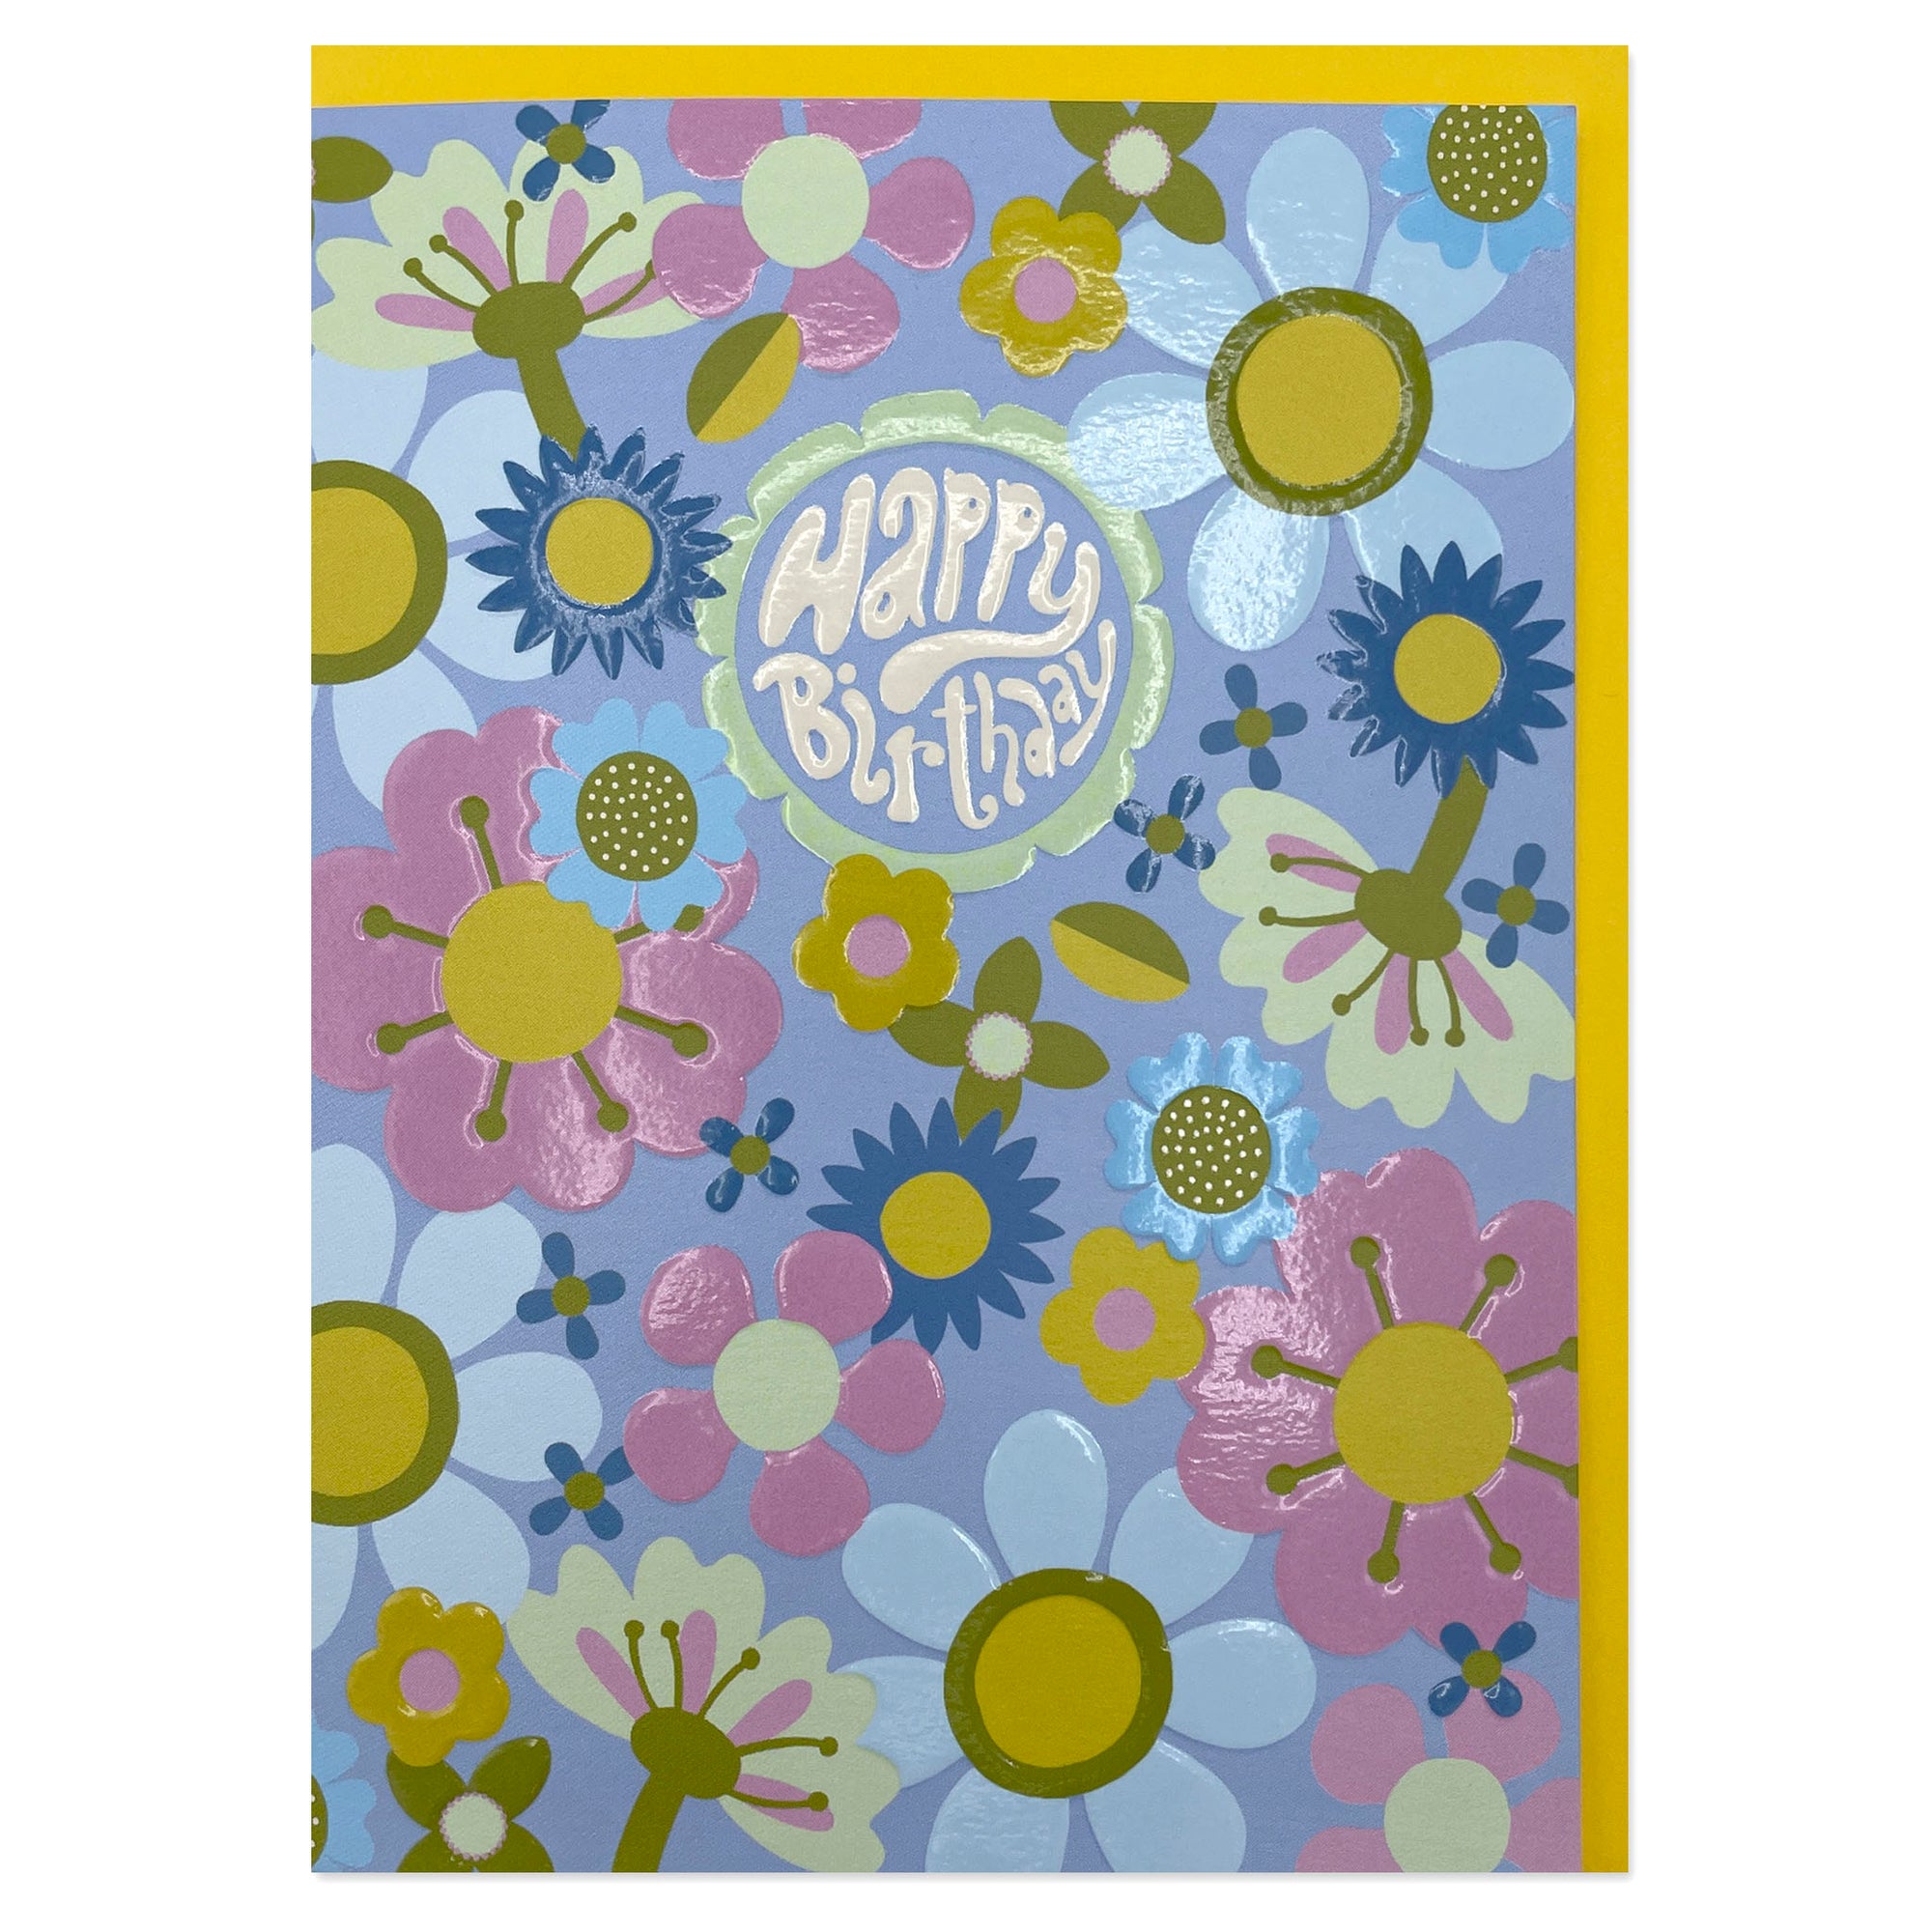 A colourful floral greetings card to celebrate a birthday where the main colour is blue. The wording in the centre of the card is 'Happy Birthday'.